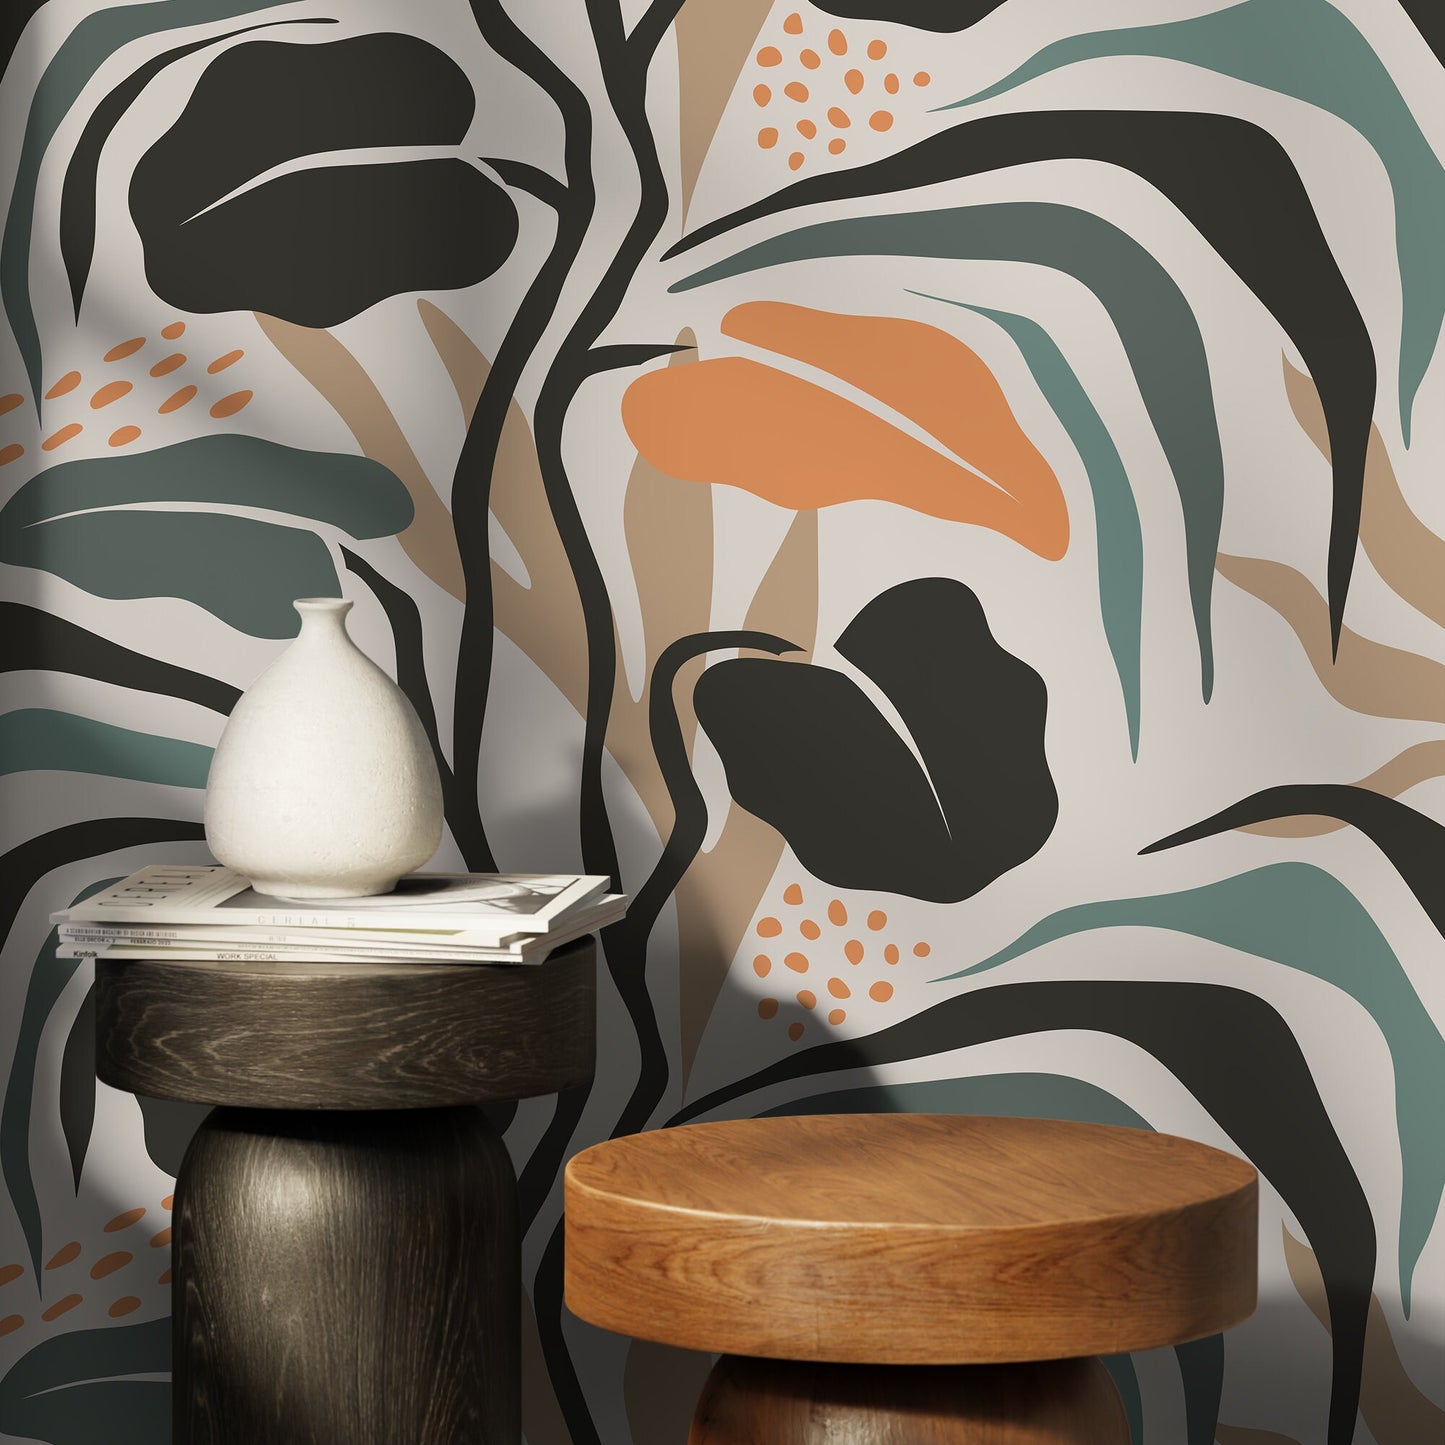 Tropical Boho Wallpaper Leaves Wallpaper Peel and Stick and Traditional Wallpaper - D718